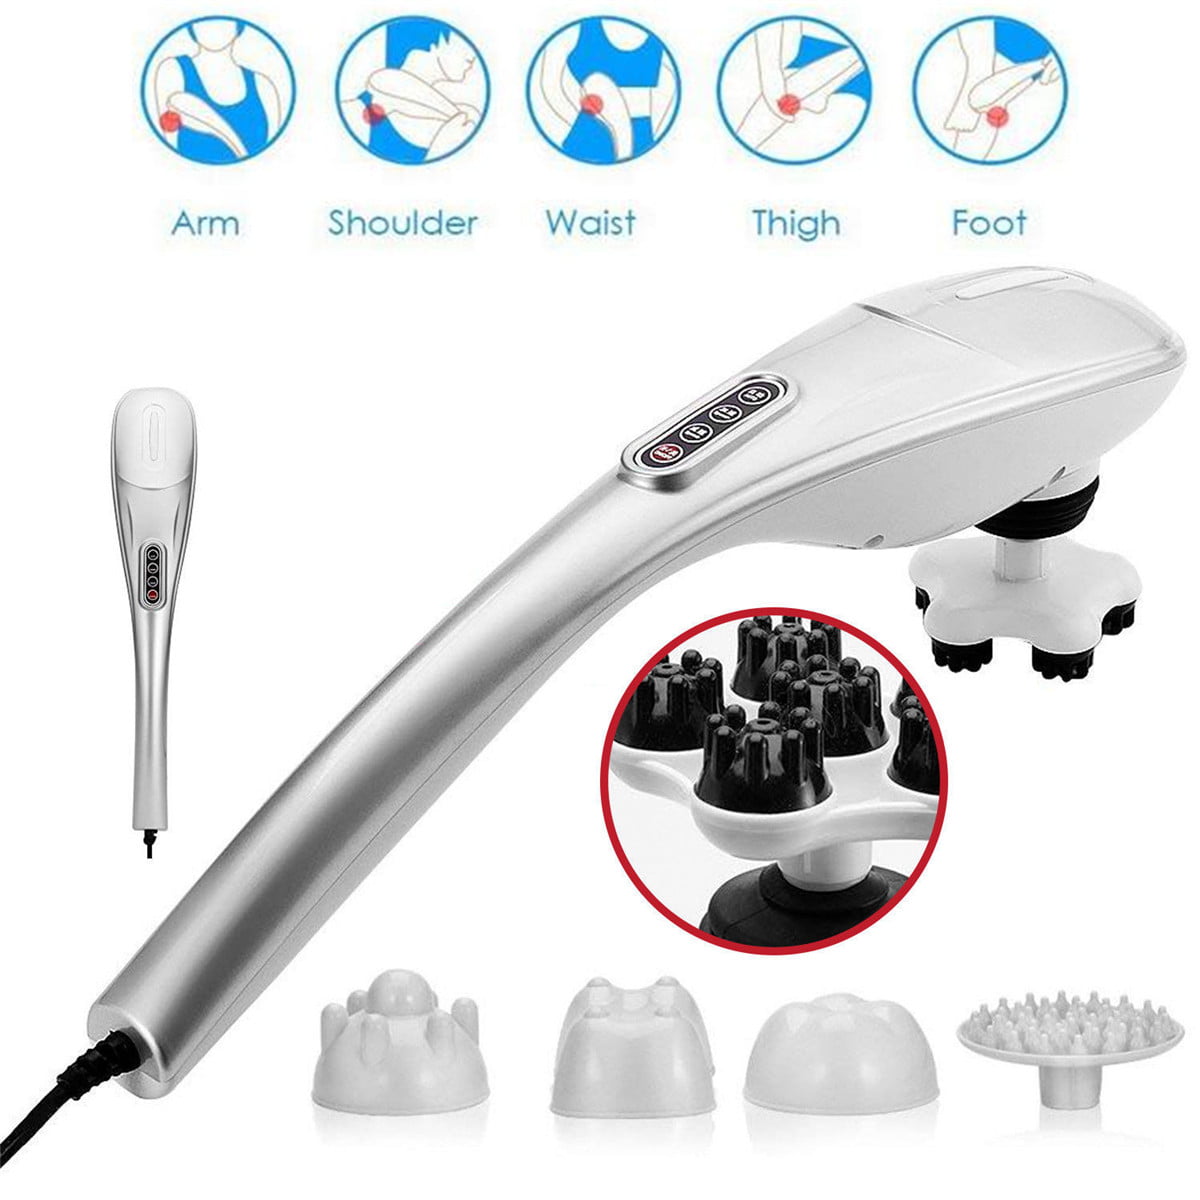 110V 5 IN 1 Handheld Electric Body Massager Back Neck Leg Arm Foot Vibrating Therapy Machine